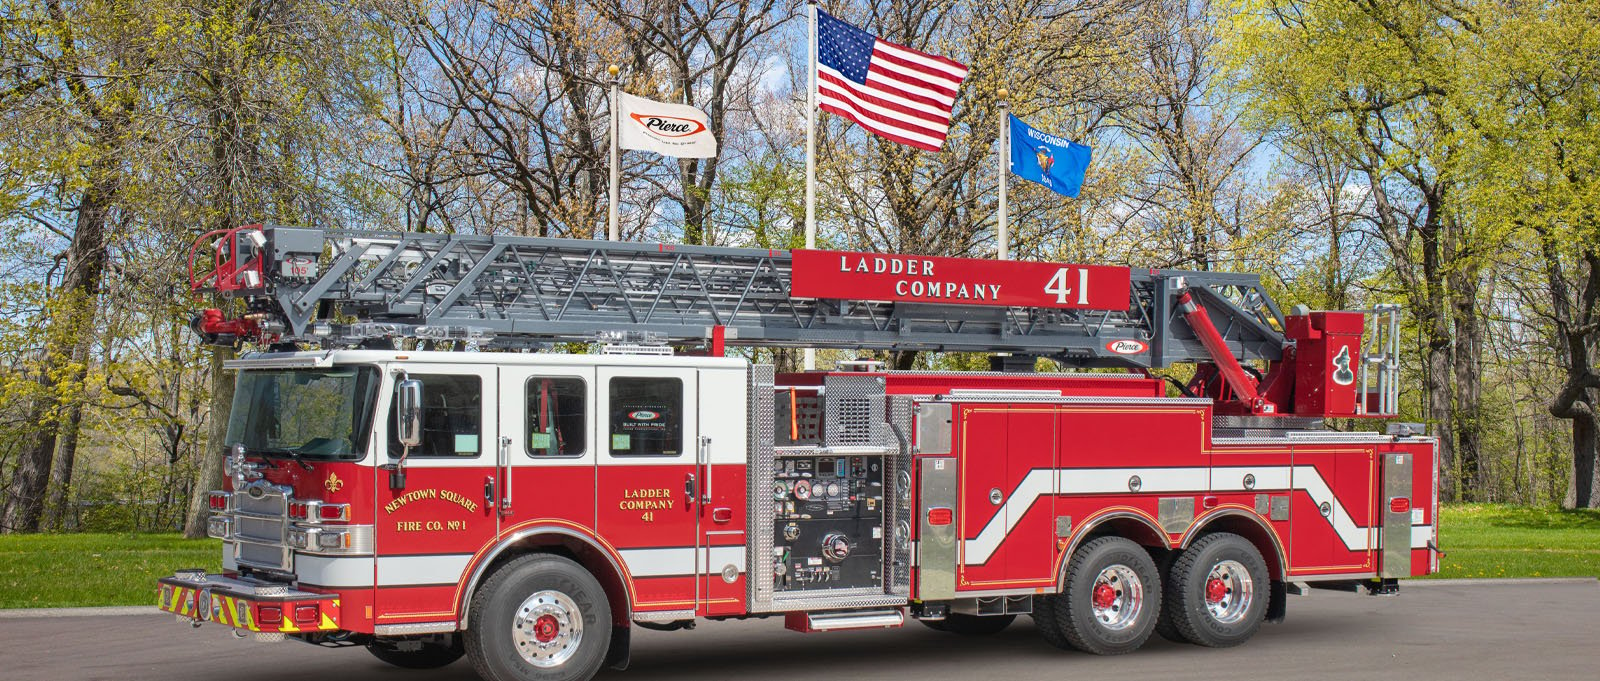 The Newtown Square Fire Company No.1 aerial truck is parked at Pierce Manufacturing in front of three flags and several trees with a blue sky background. 